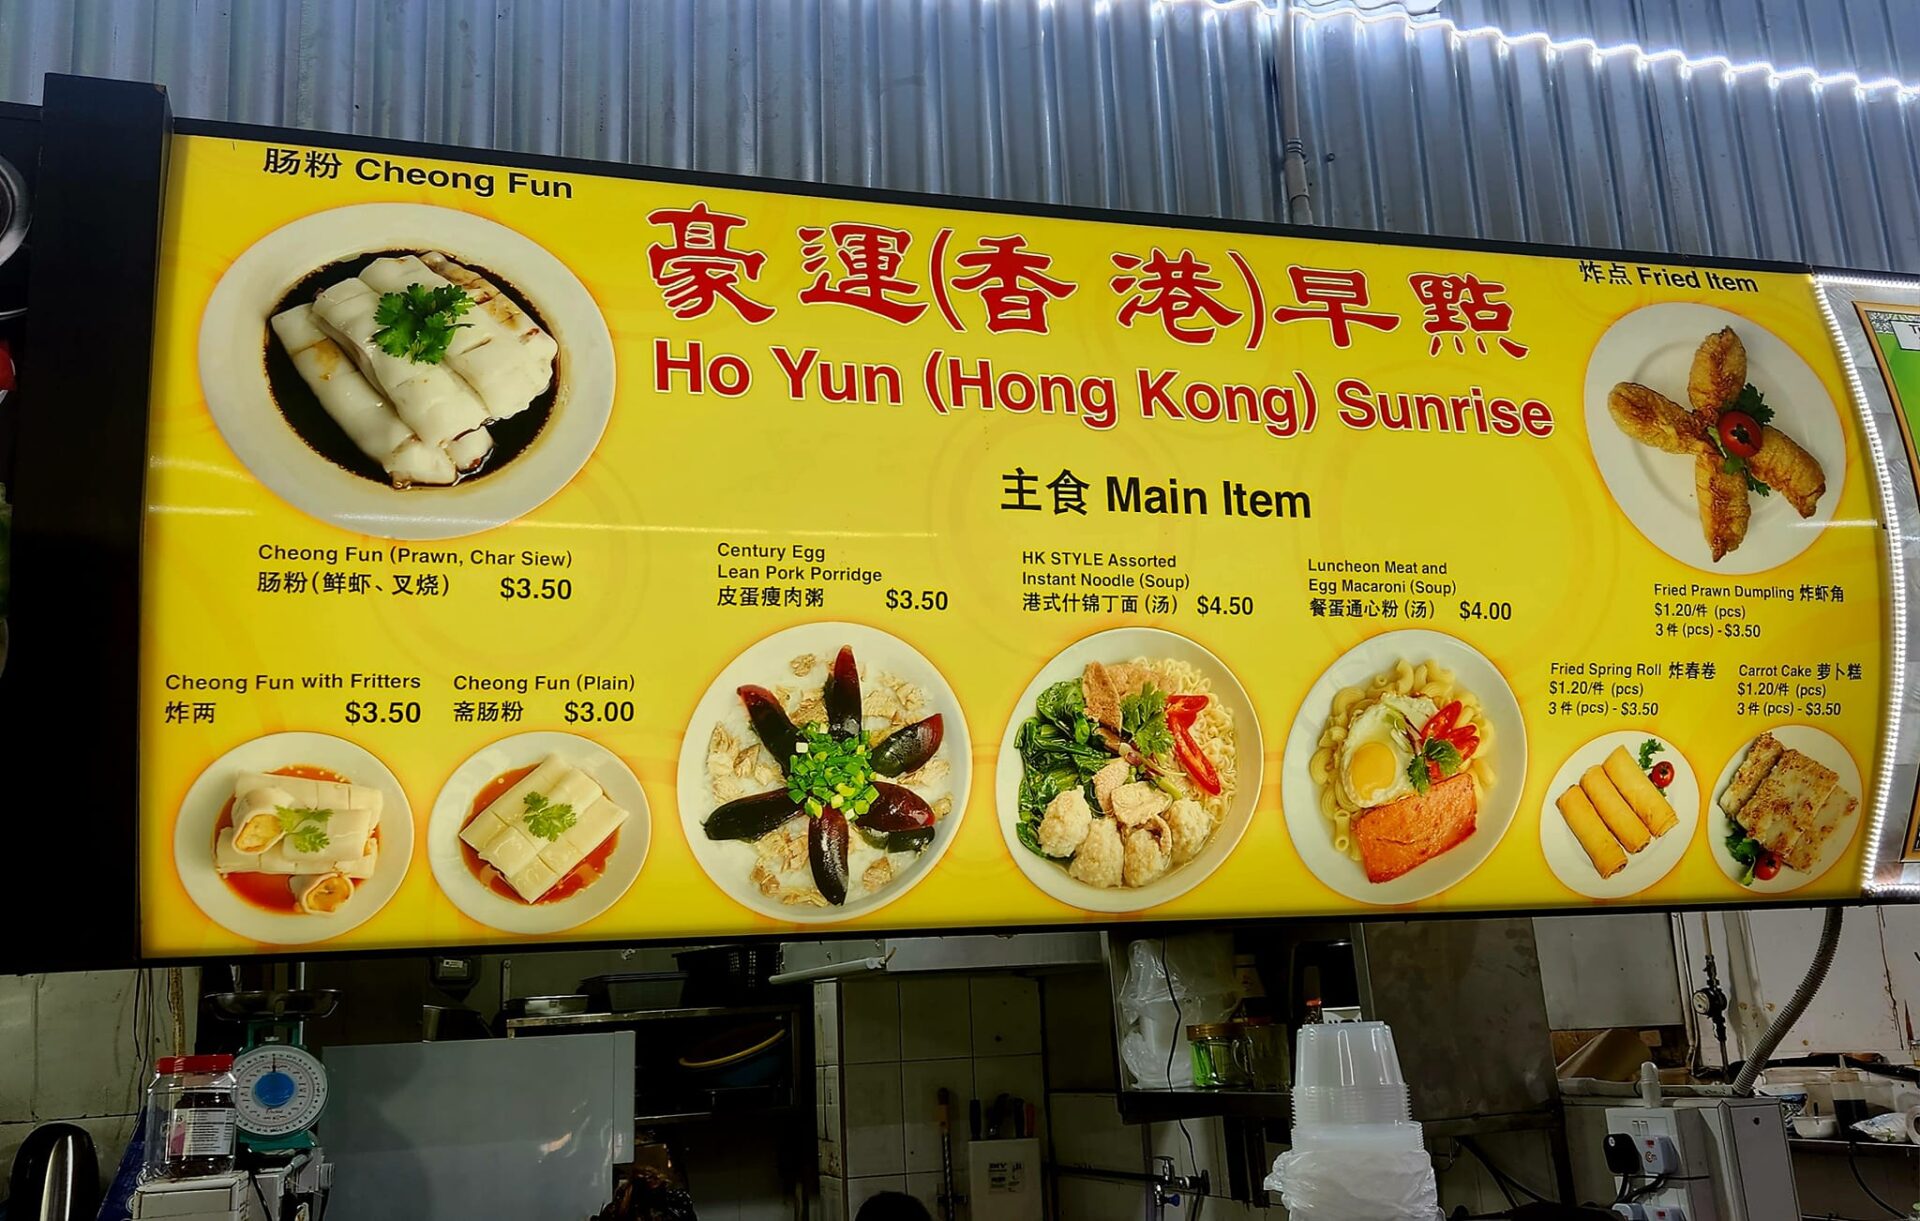 Ho Yun Dim Sum reopens - New banner